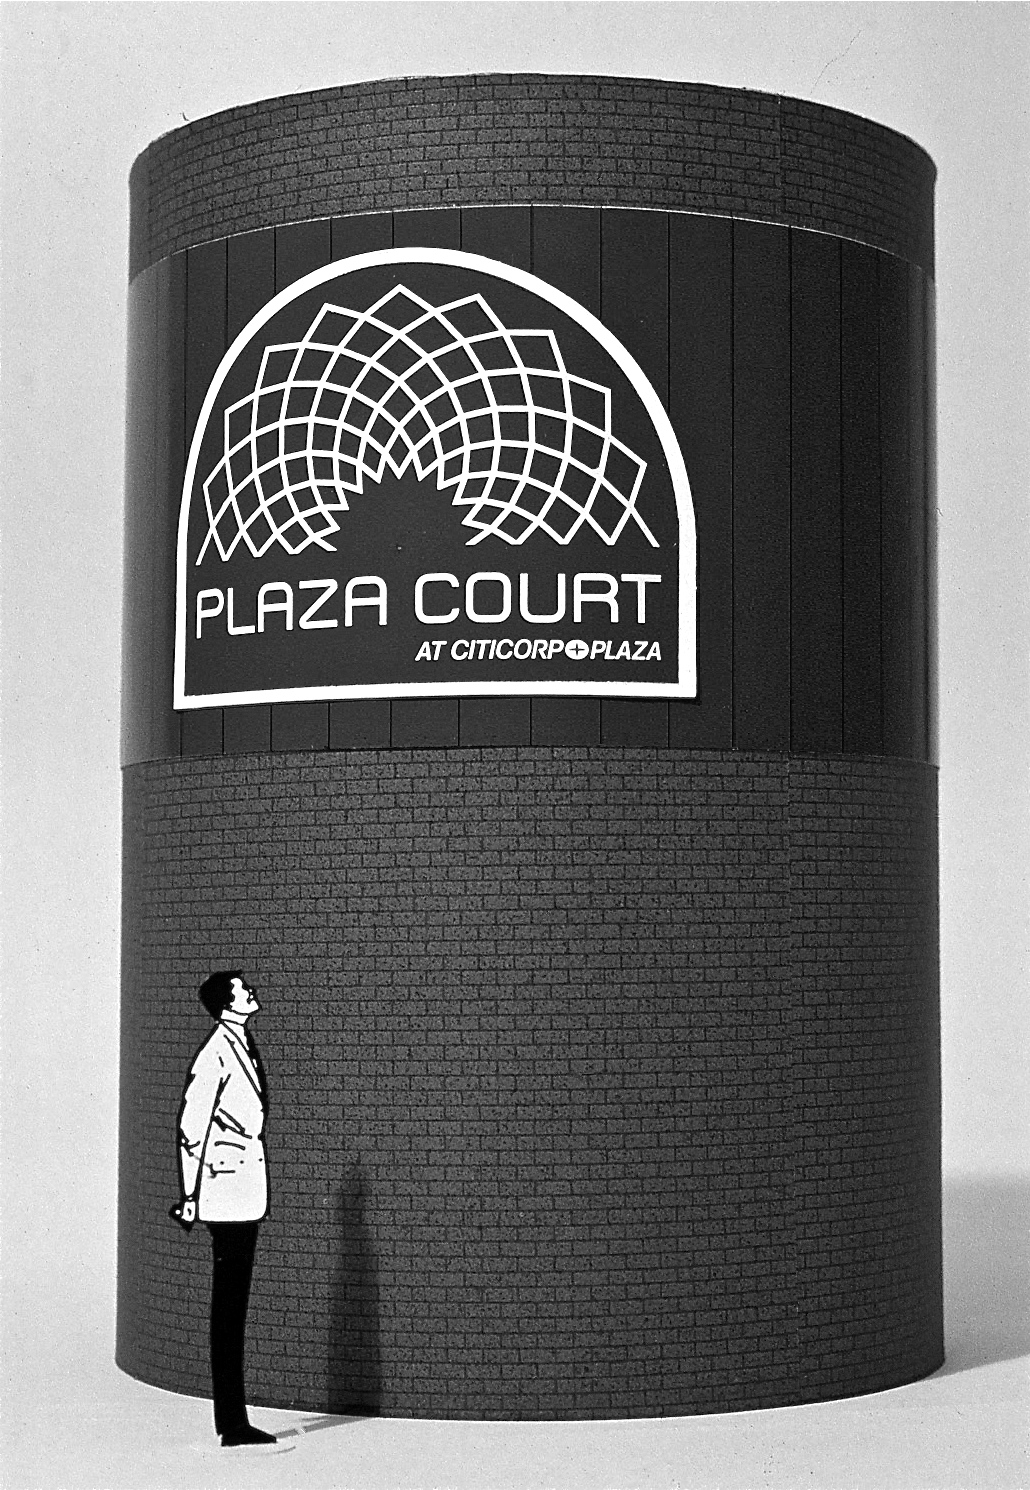 SCale model featuring a man looking up at a large circular brick outdoor ventilation vent with the Plaza Court logo on it.